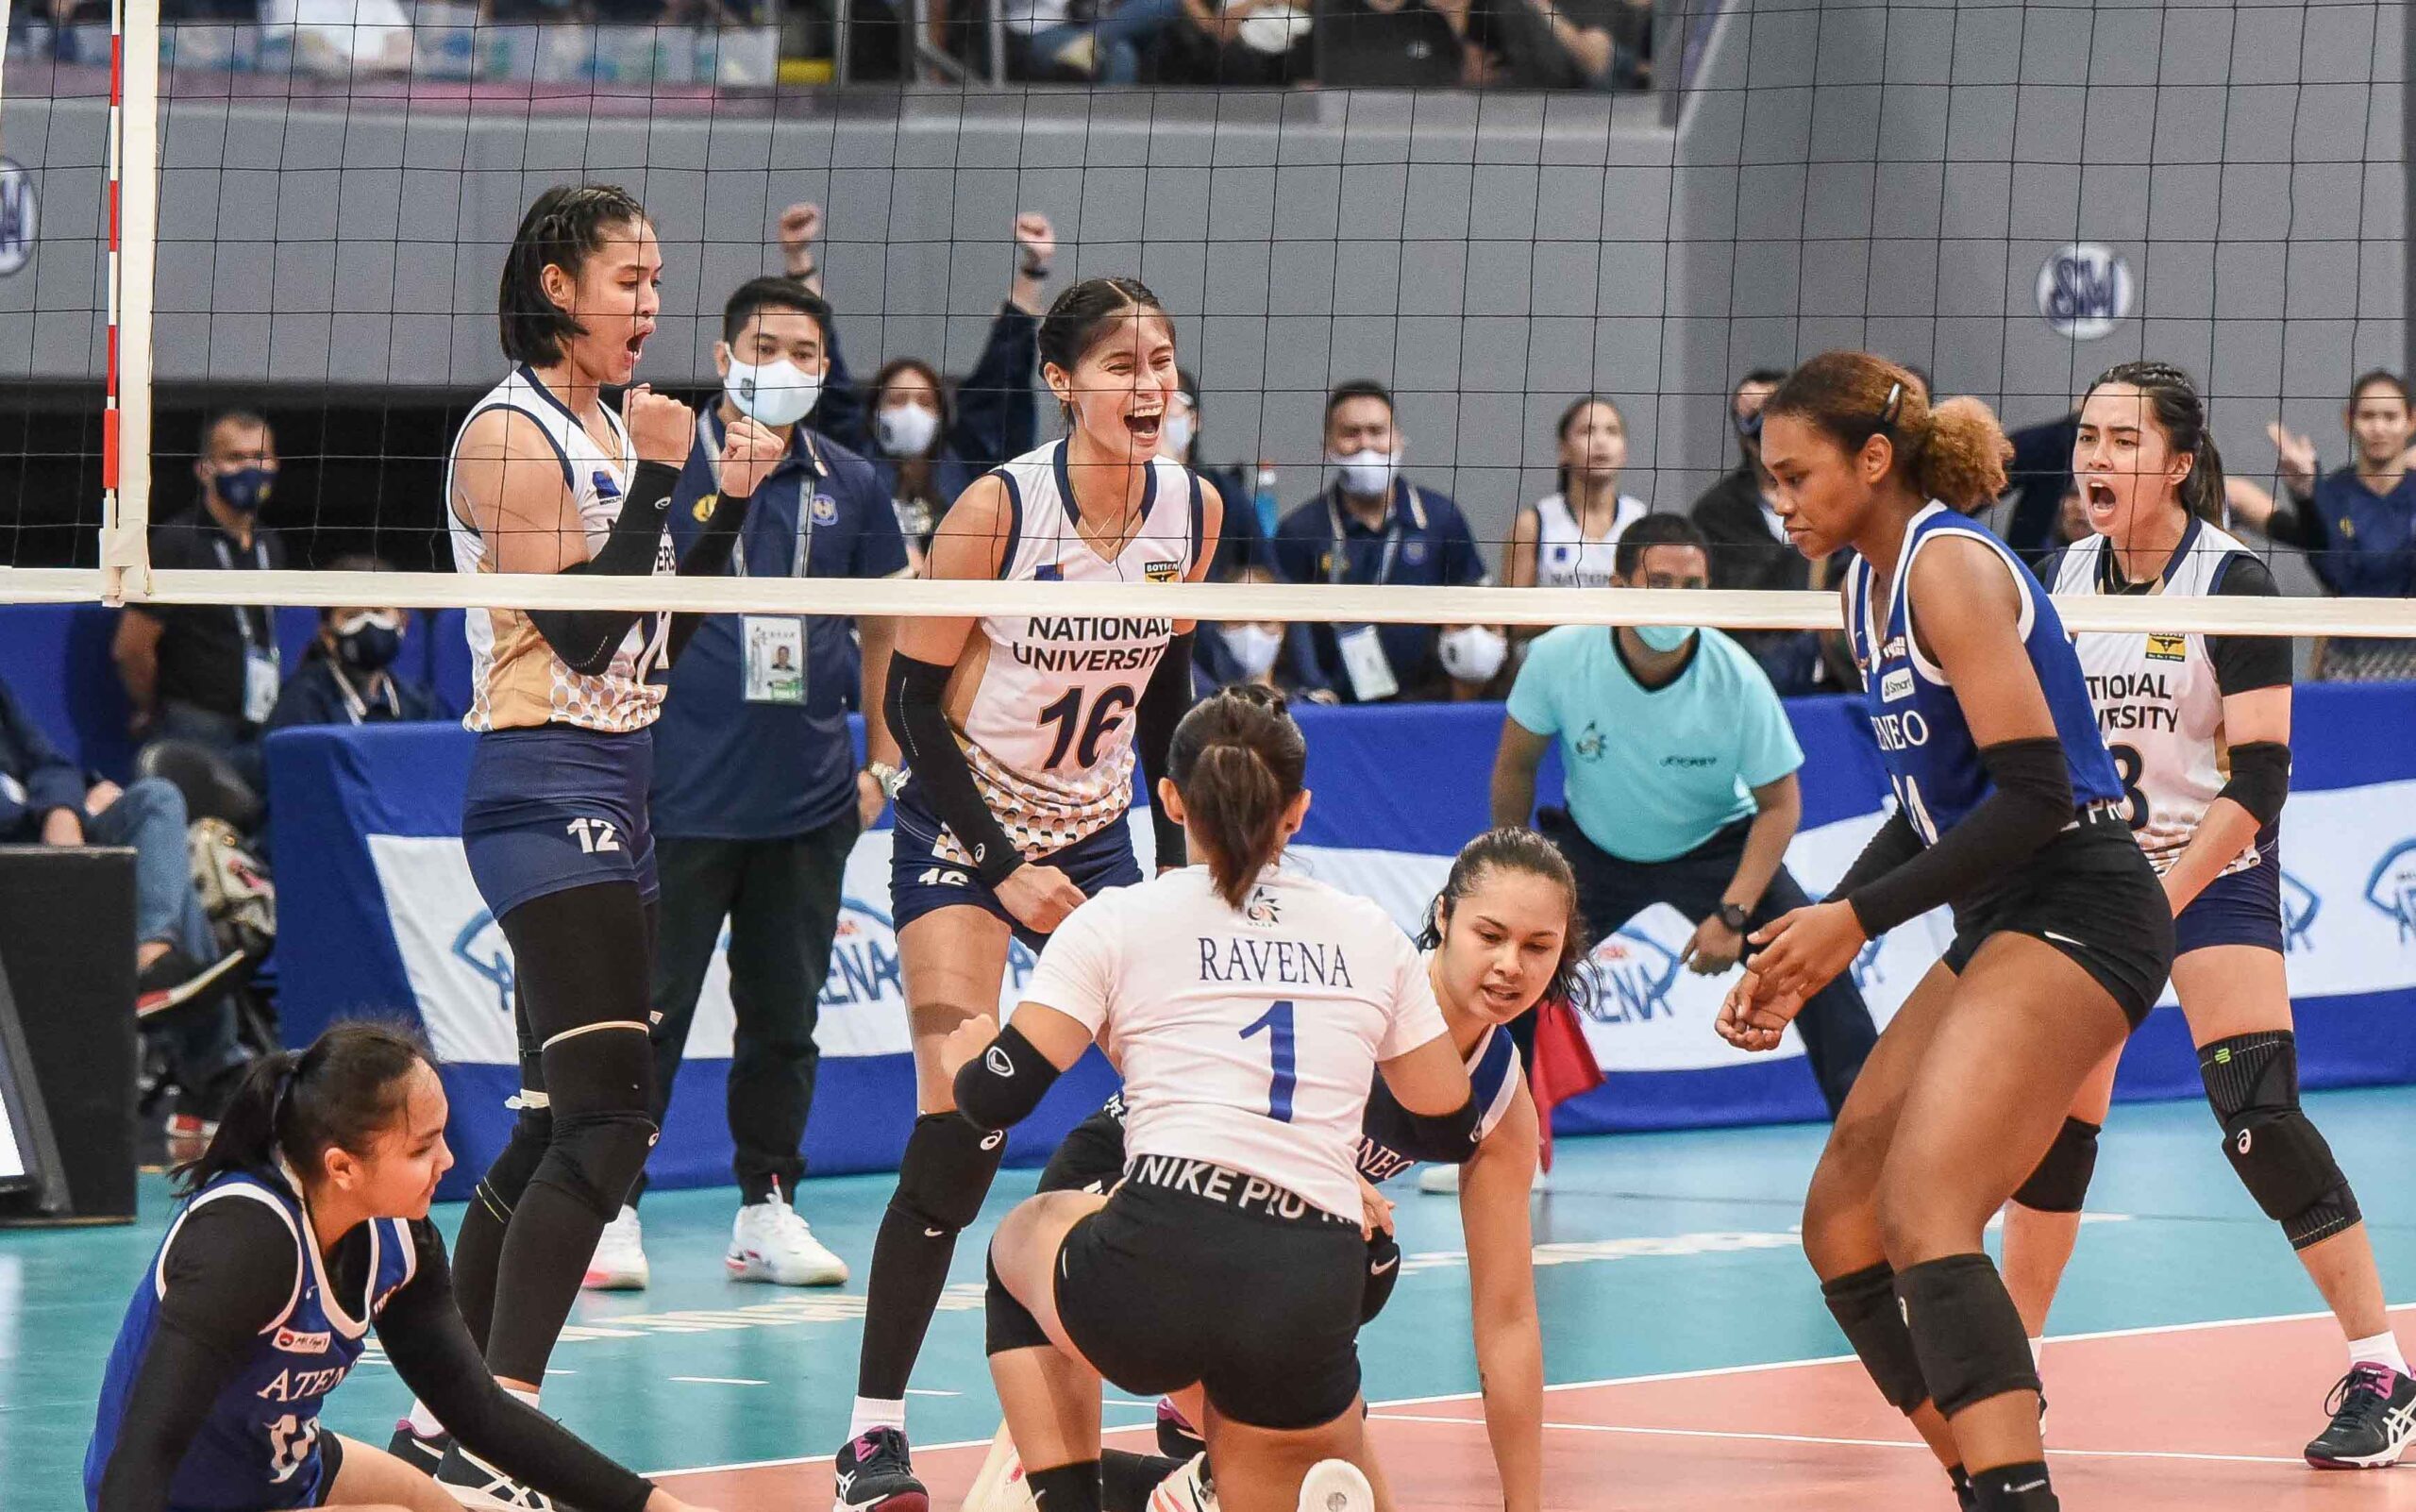 NU off to 2-0 start as struggling Ateneo stays winless in UAAP volleyball